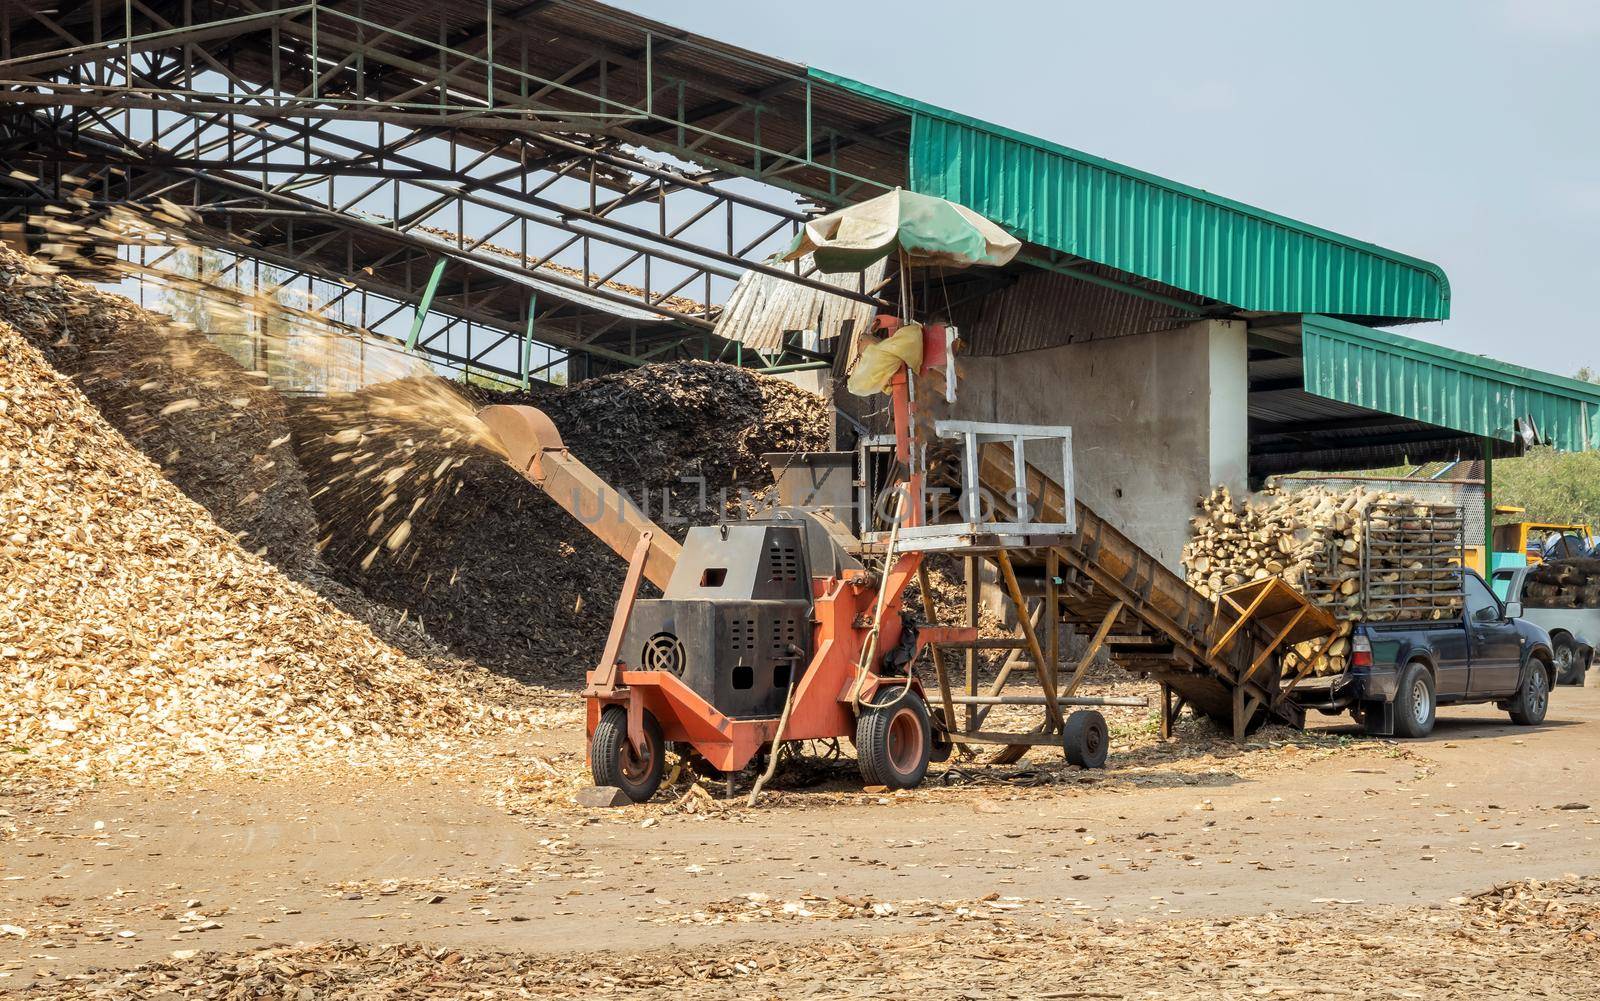 Crushing machine of wood and logs to process waste and transform into pellets